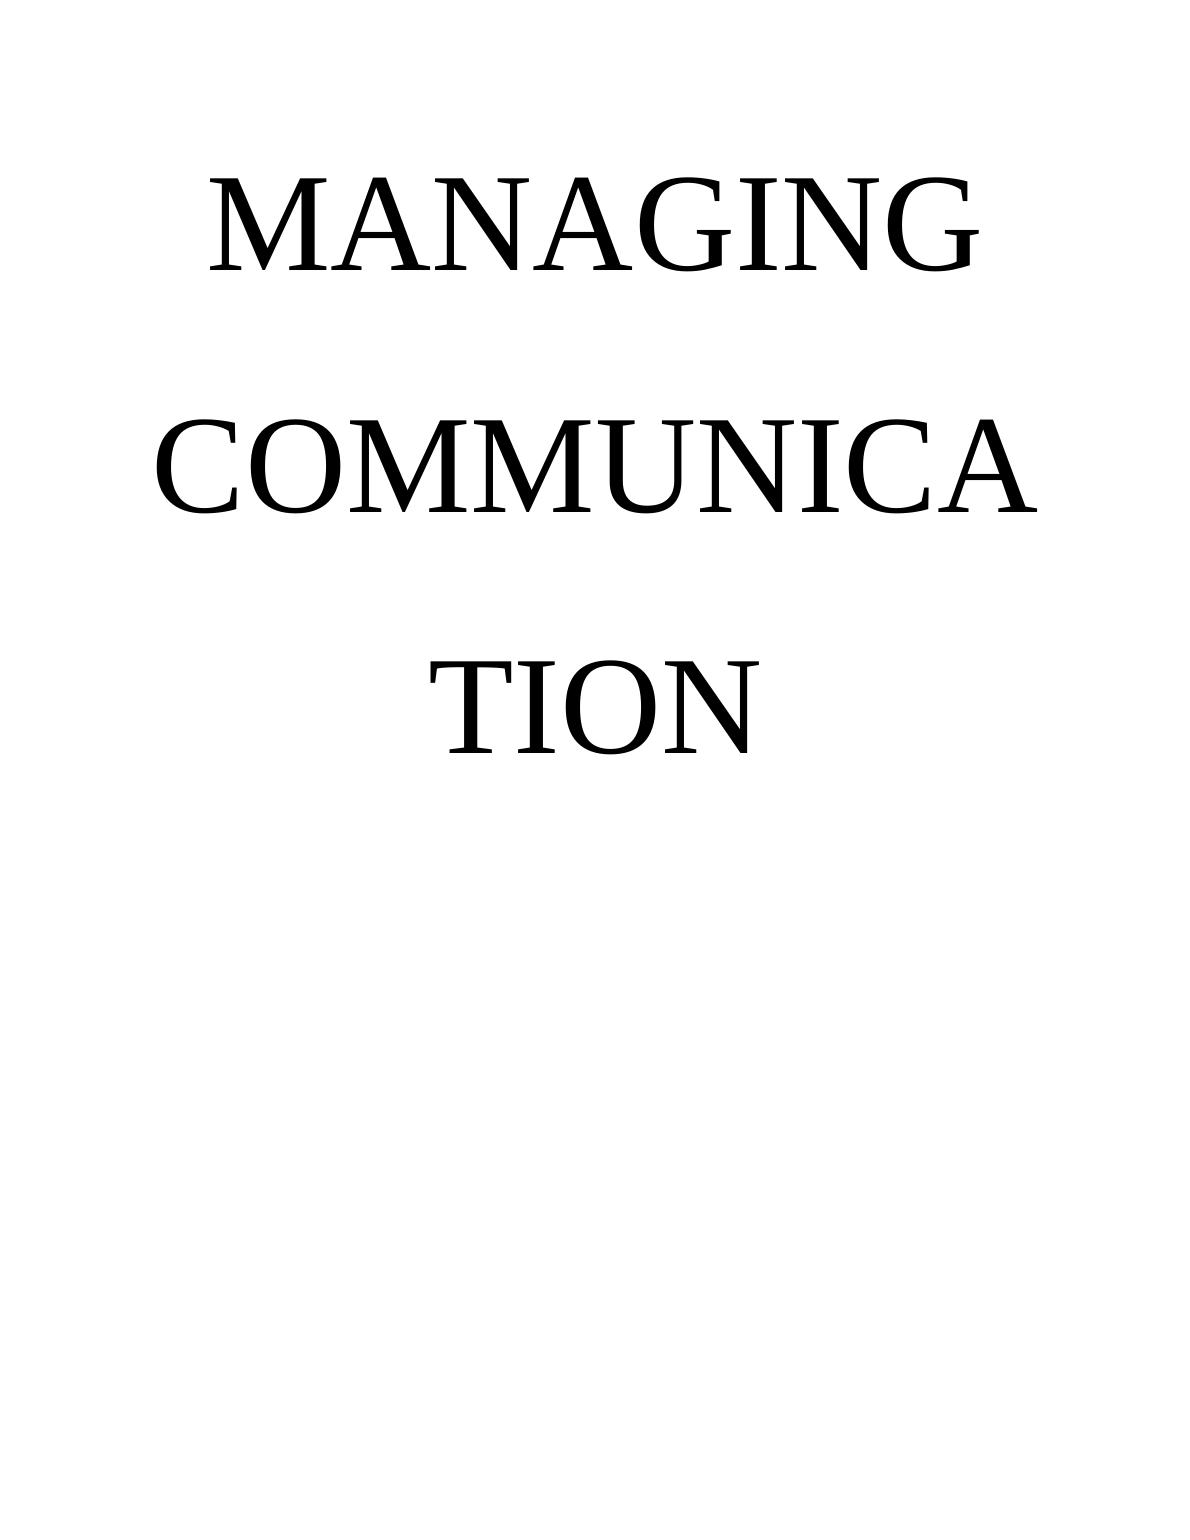 ManAGING COMMUNICATION INTRODUCTION IN BUSINESS ANALYSIS_1